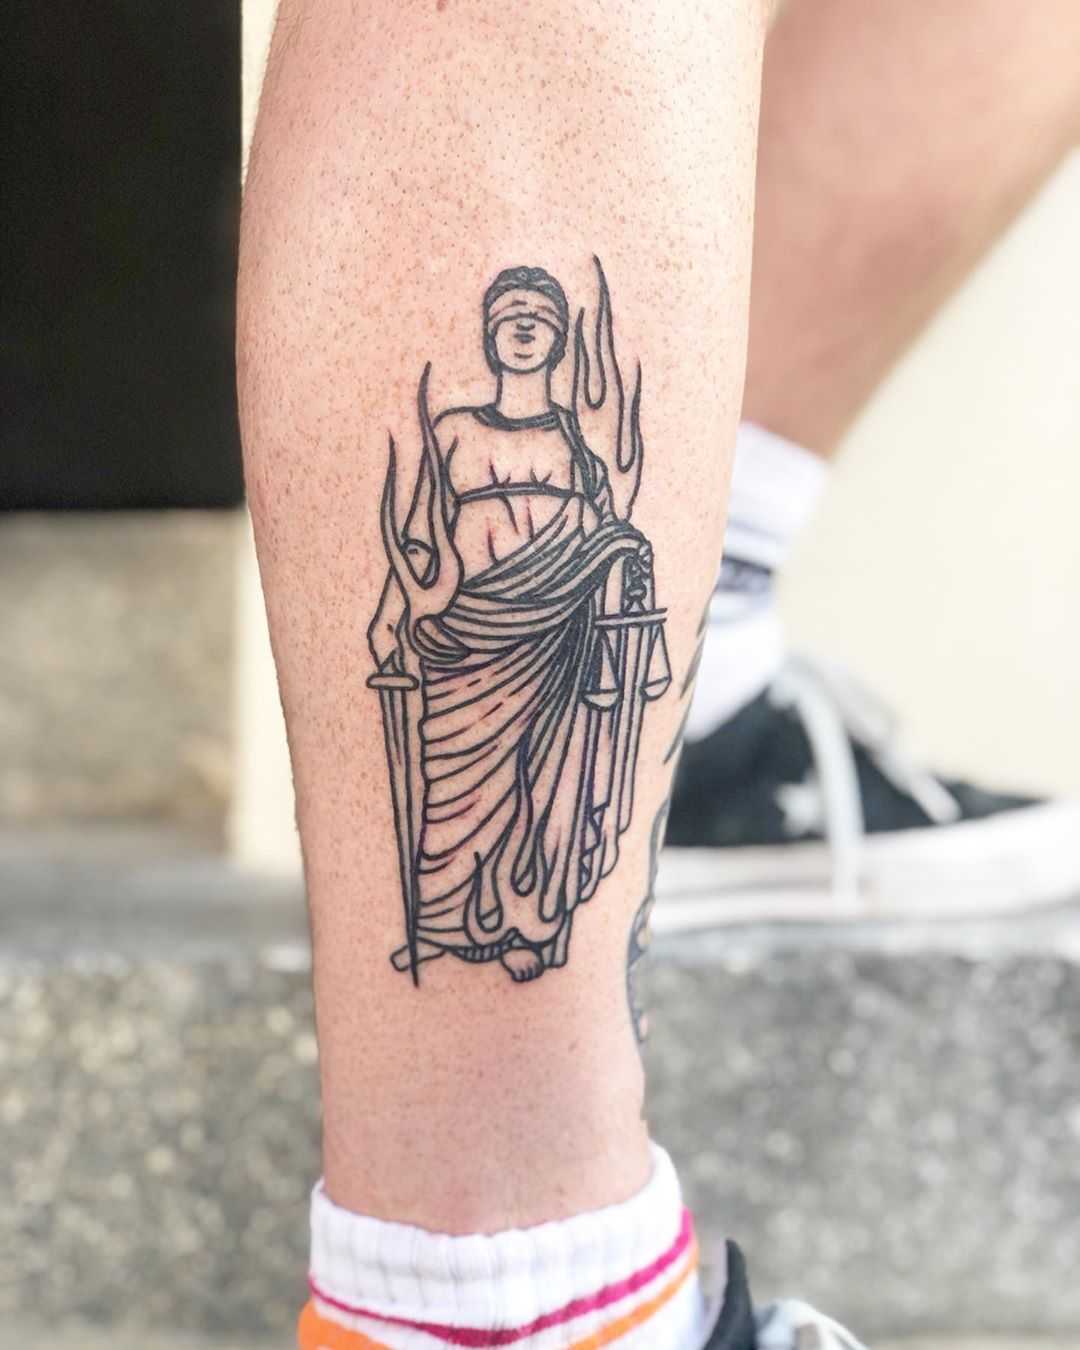 Justice is blind by Hand Job Tattoo